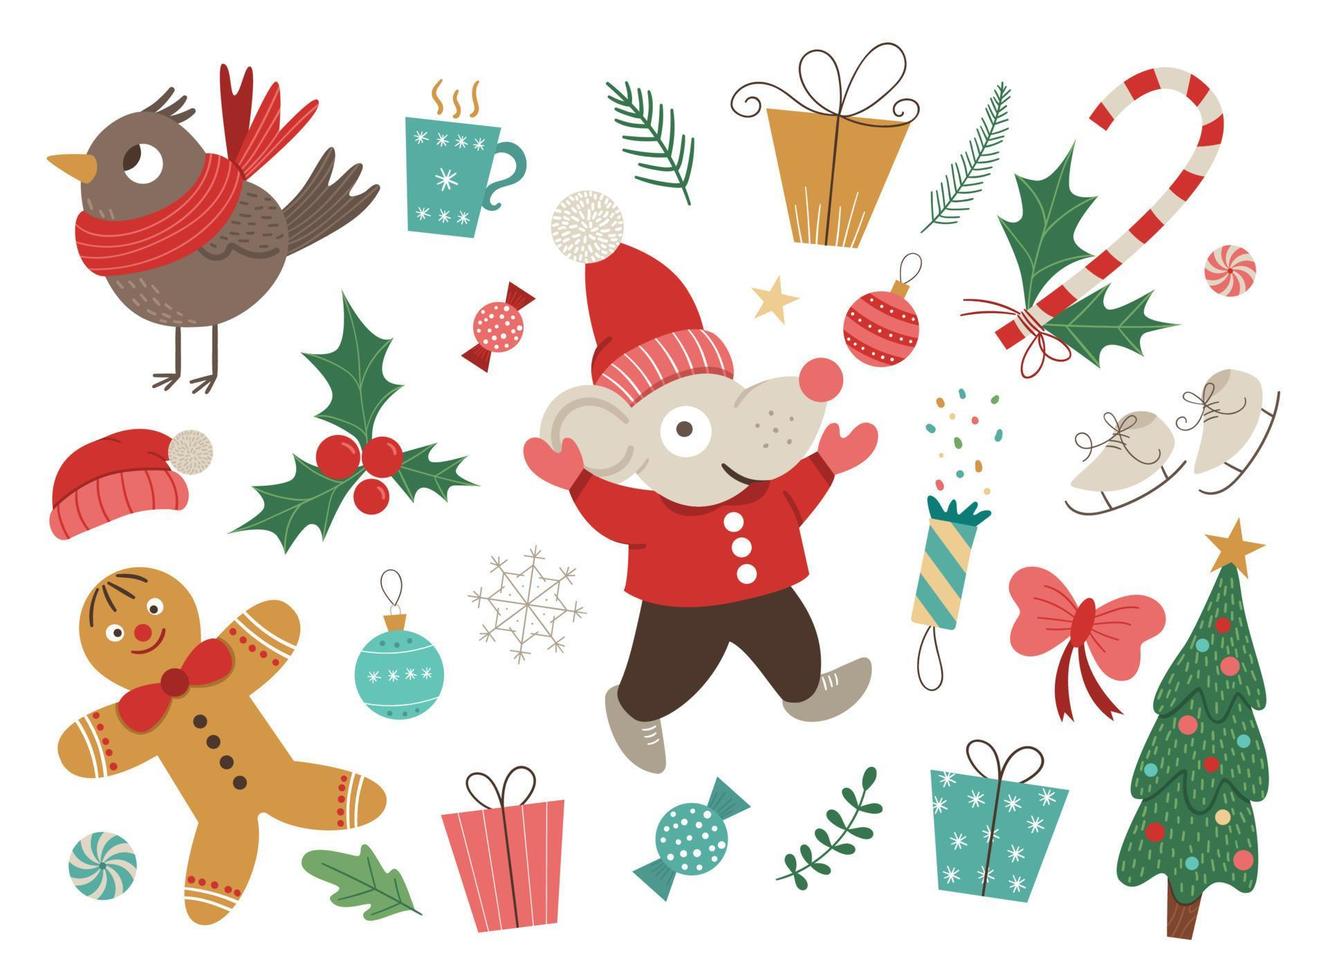 Vector set of Christmas elements with mouse in red hat and jacket with hands up isolated on white background. Cute funny illustration of 2020 year symbol. Christmas flat style picture for new year